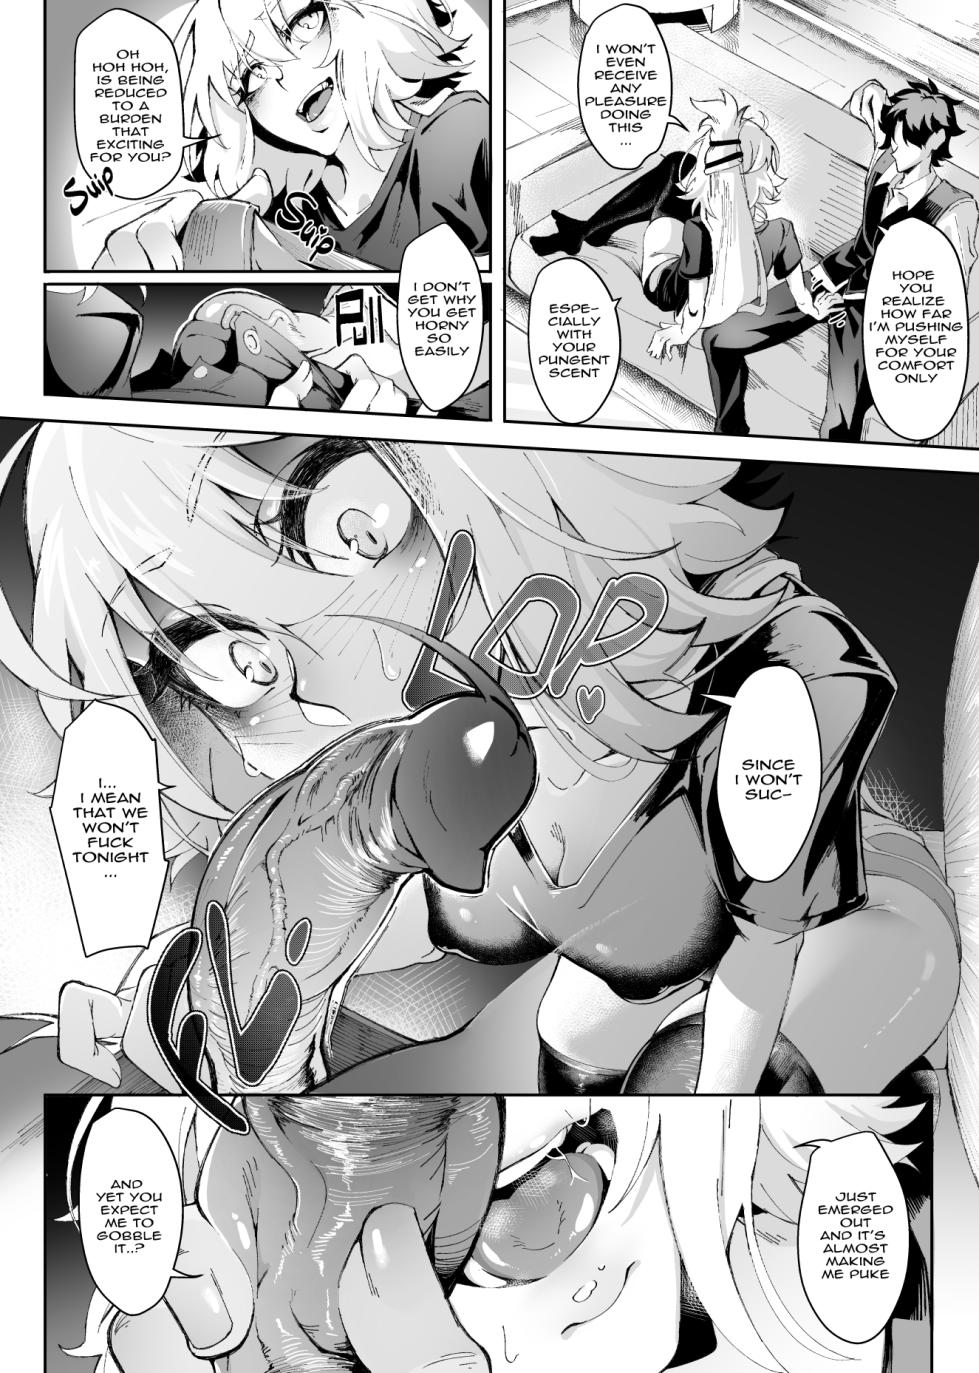 [Kid] The Baddest (Fate/Grand Order) - Page 20